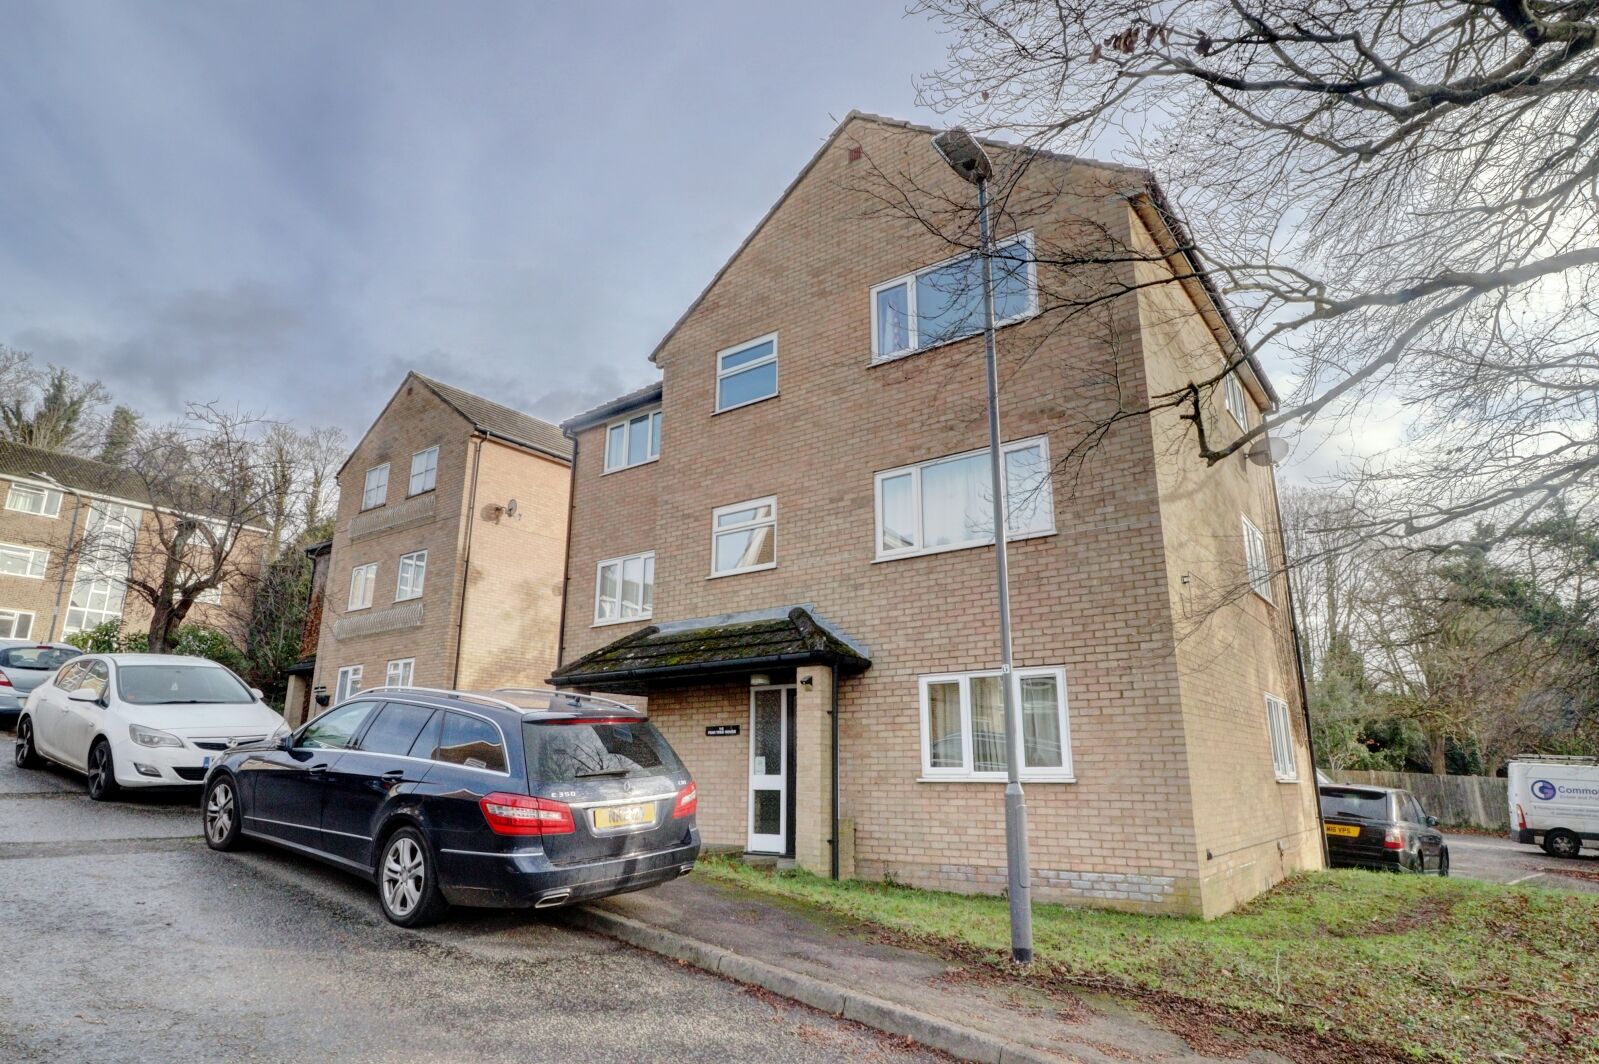 2 bedroom  flat to rent, Available now Brambleside, High Wycombe, HP11, main image